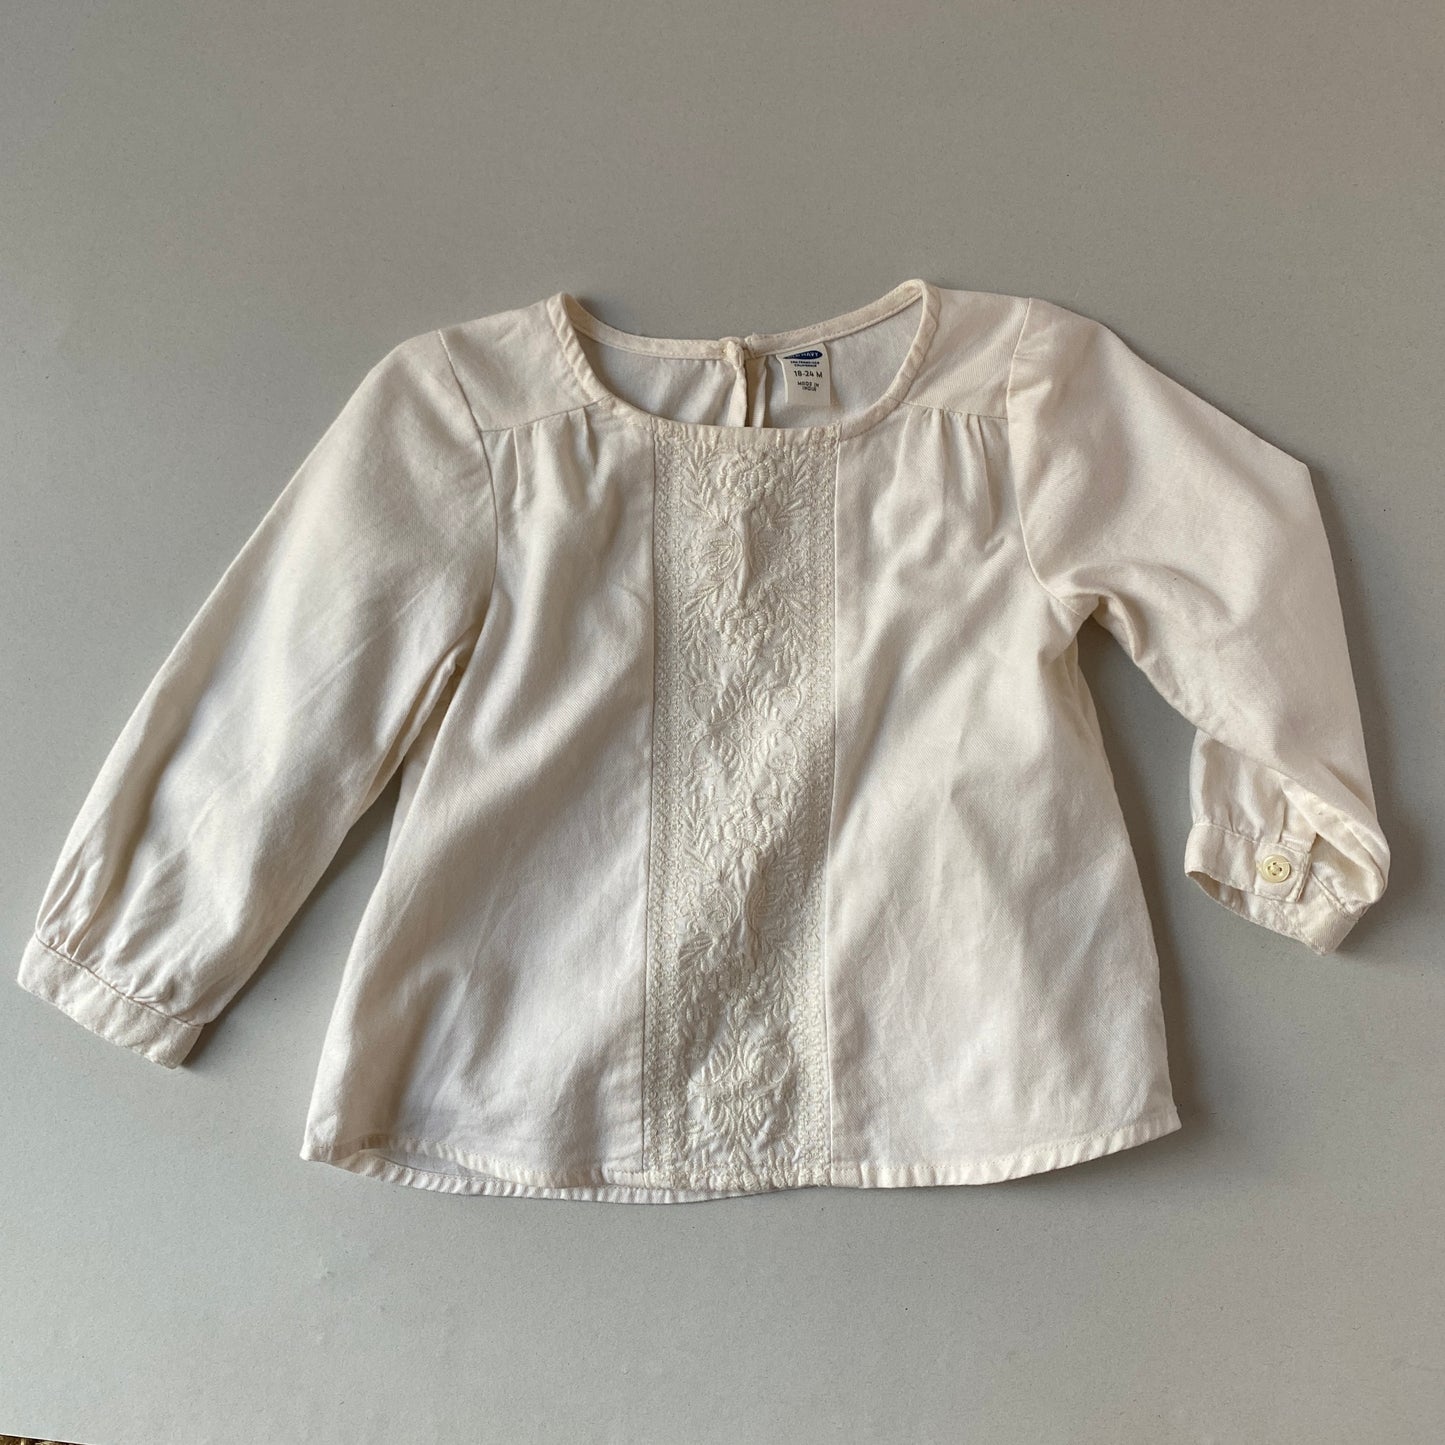 Light Cream Floral Embroidered Top (18/24M)